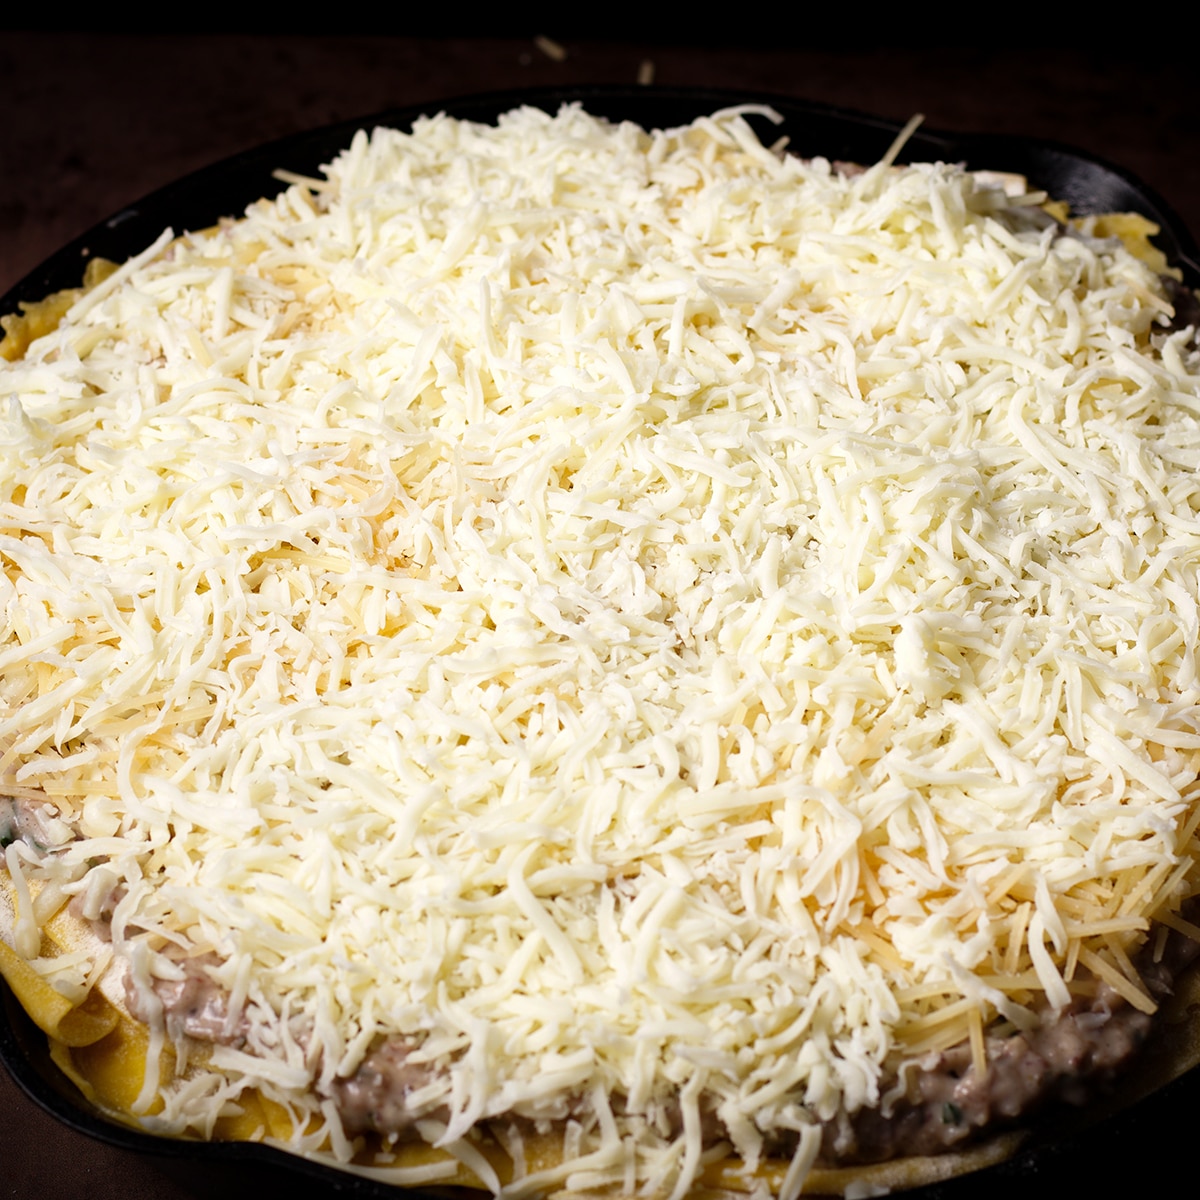 A skillet vegetable lasagna with white sauce that's ready to bake.